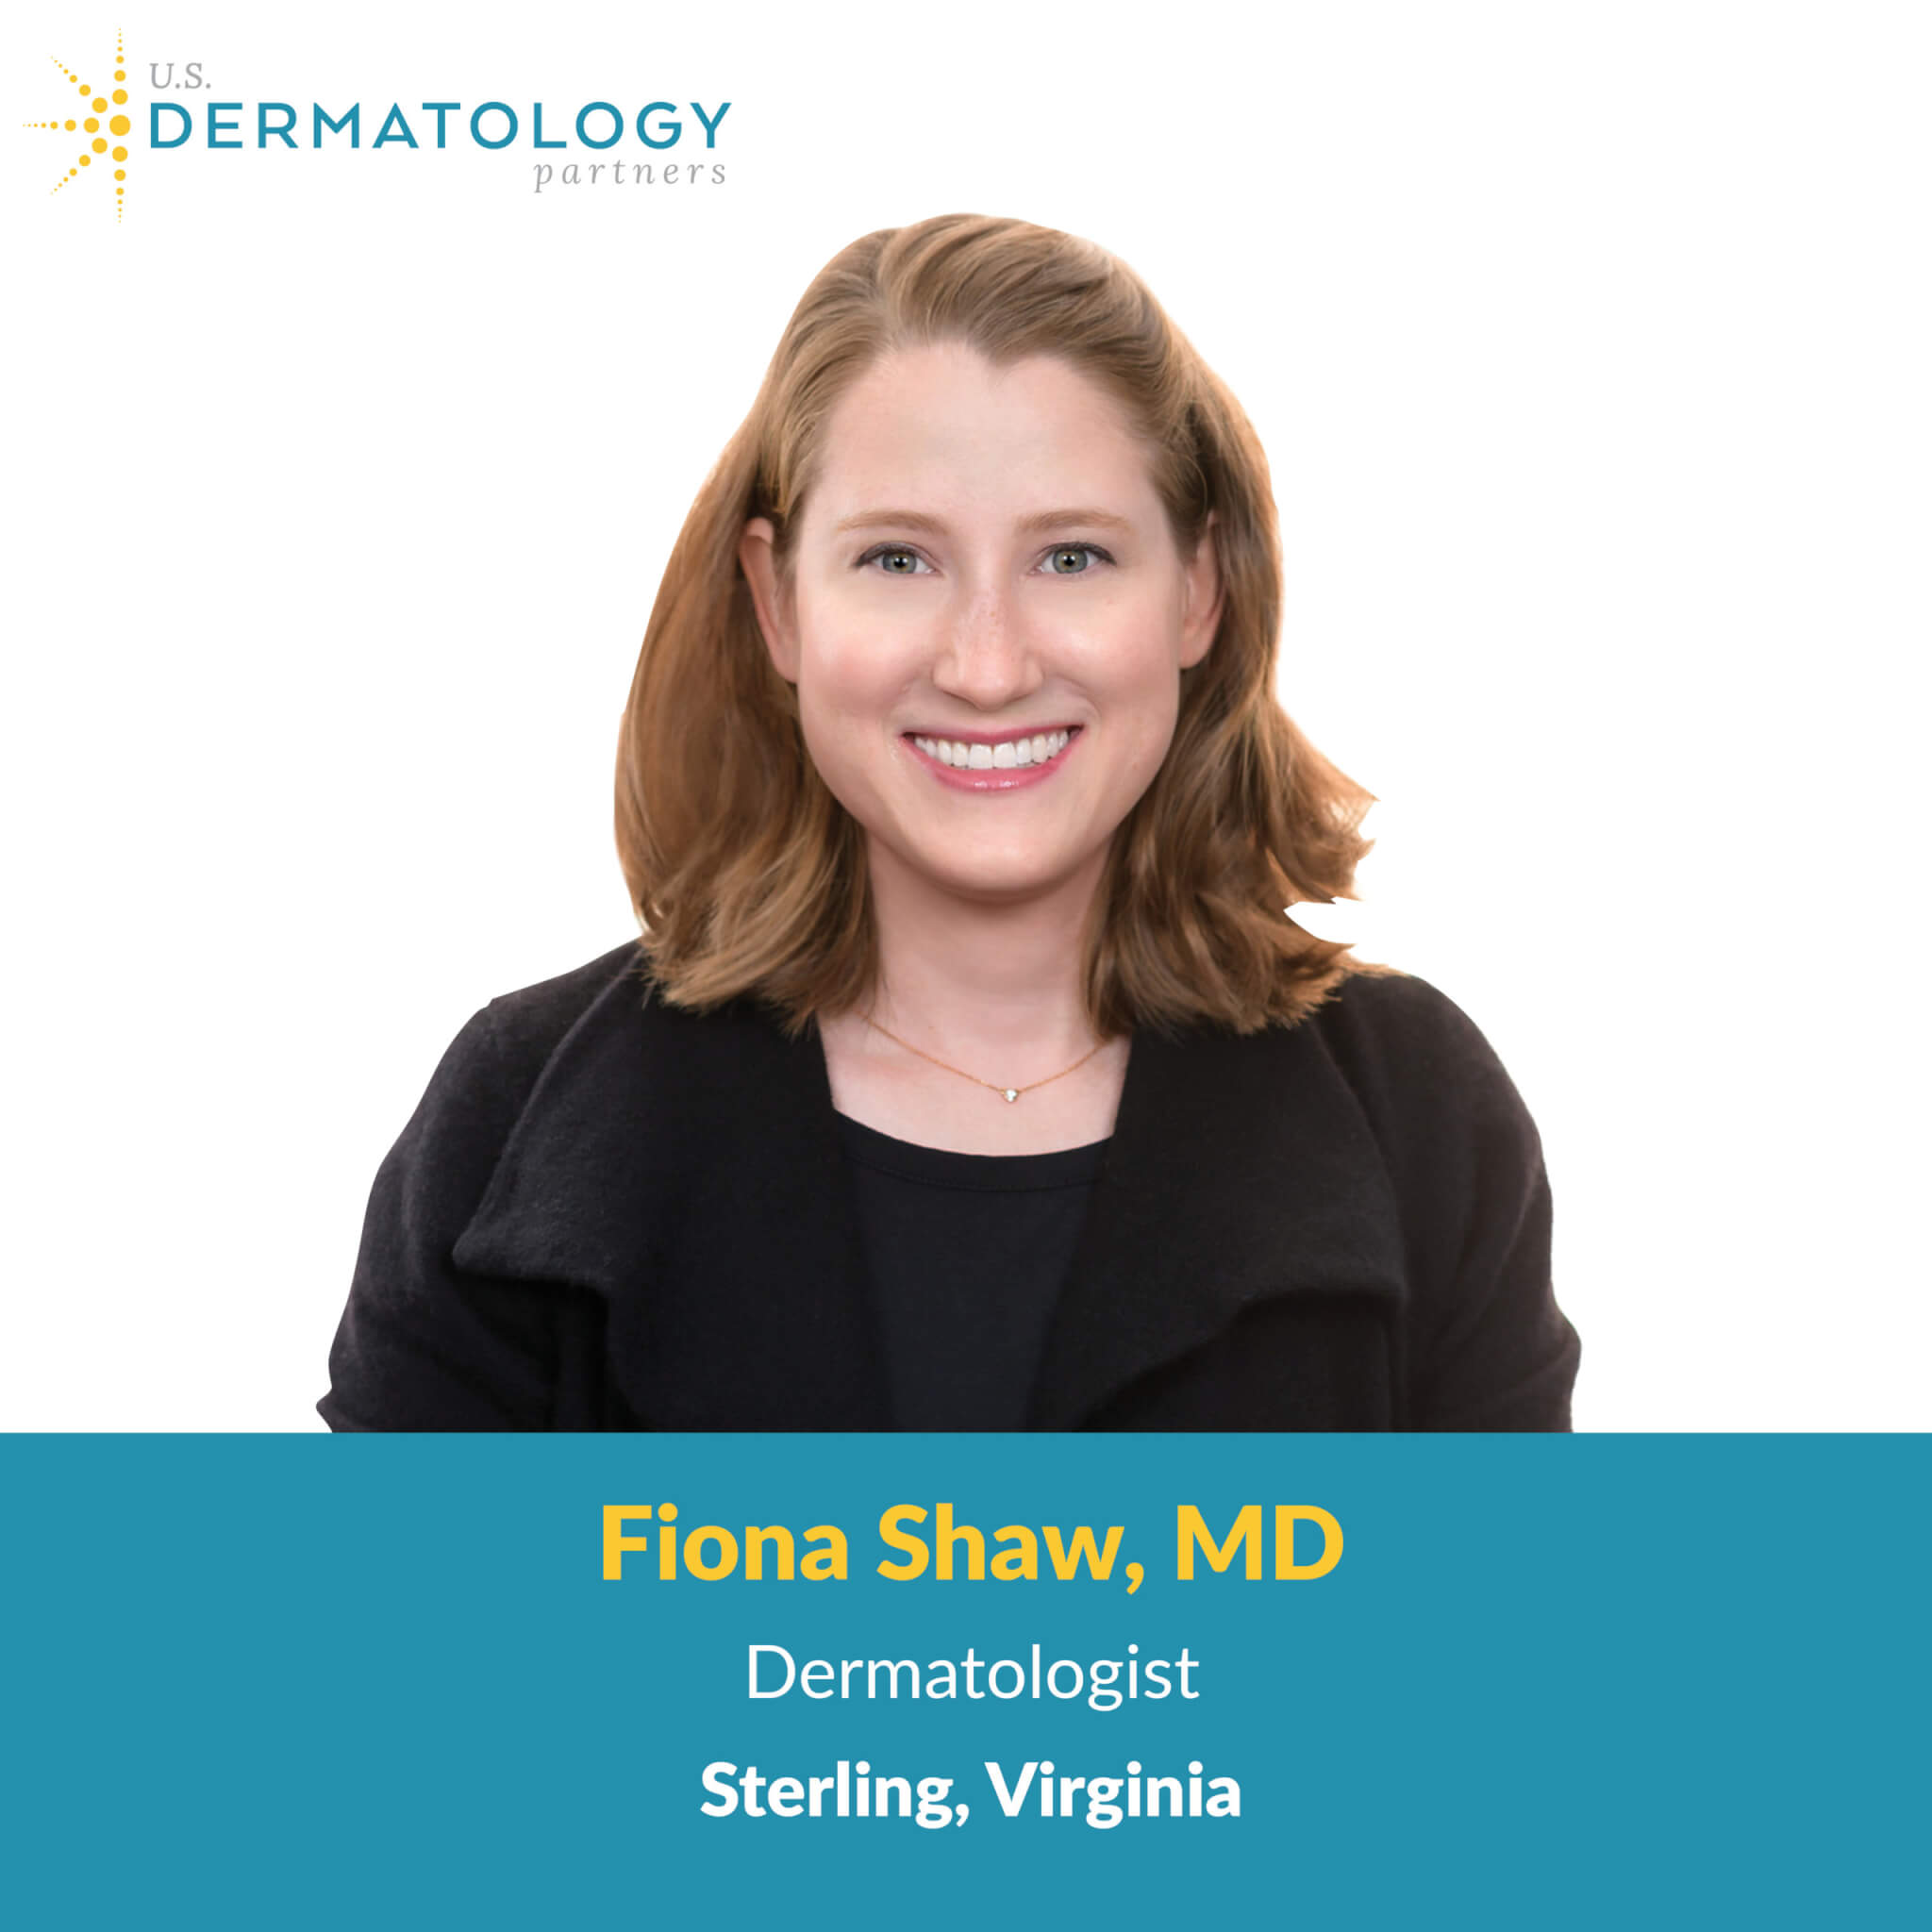 Dr. Fiona Shaw is a dermatologist in Sterling, Virginia at U.S. Dermatology Partners. Her services include acne, psoriasis, skin cancer, and more!